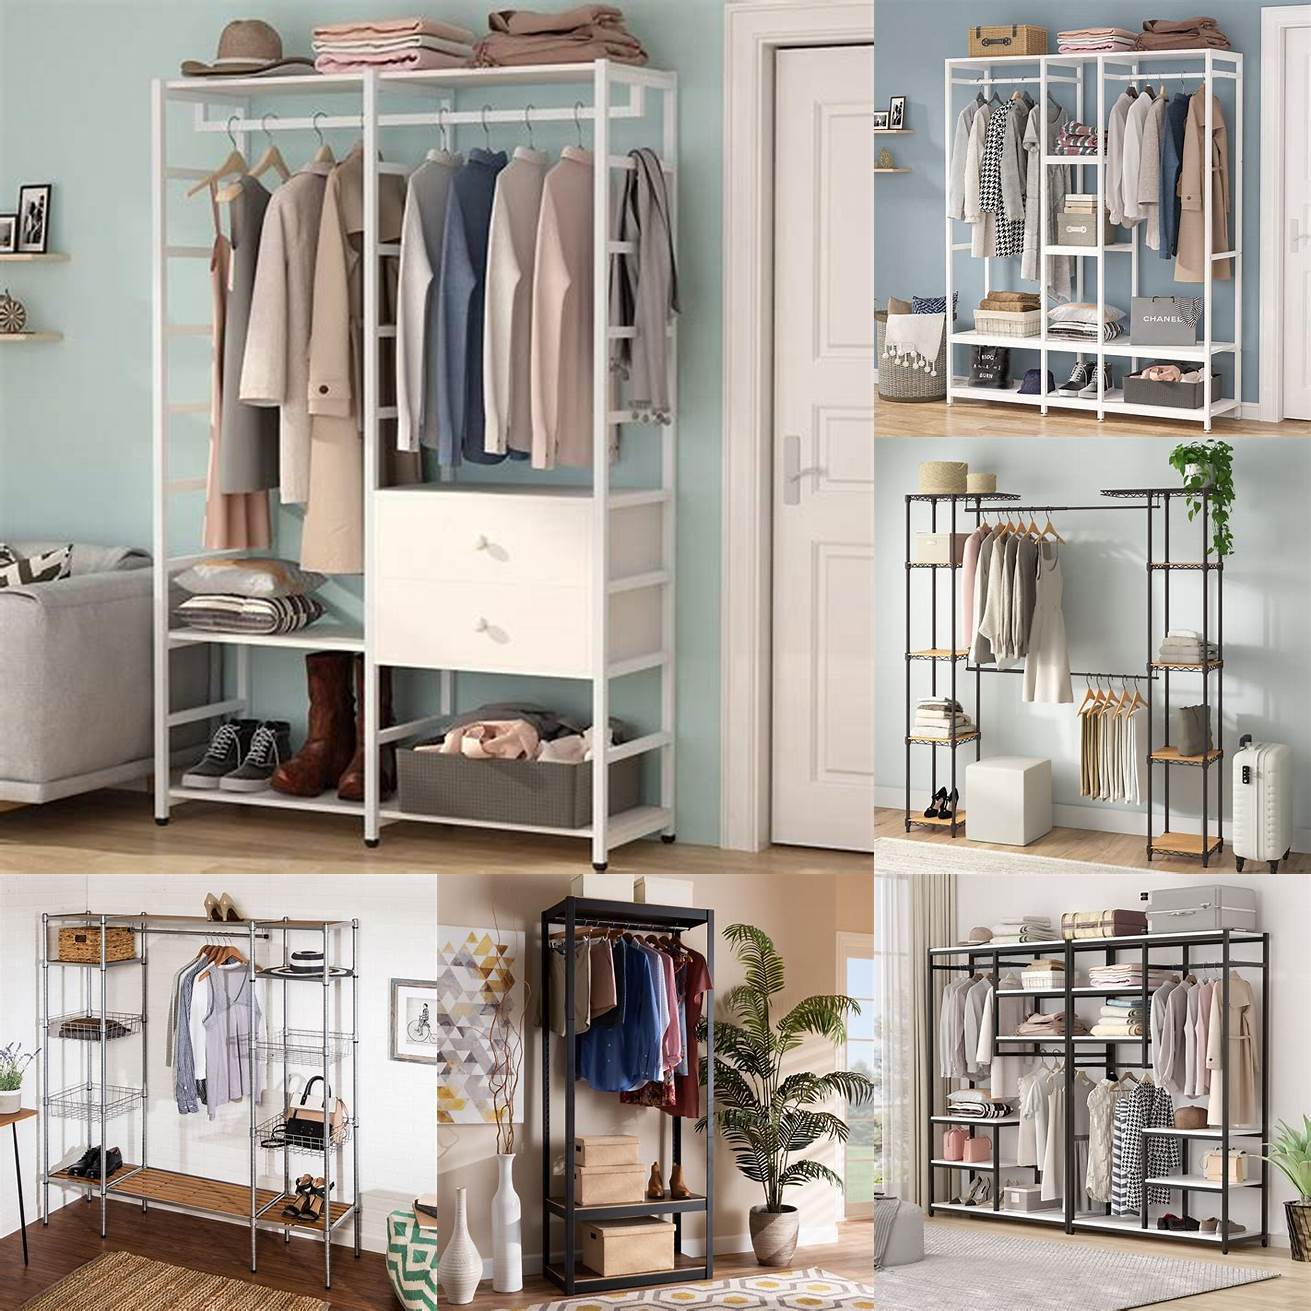 1 Wardrobe a free-standing closet that can be moved from room to room It is ideal for those who move frequently or need additional storage space